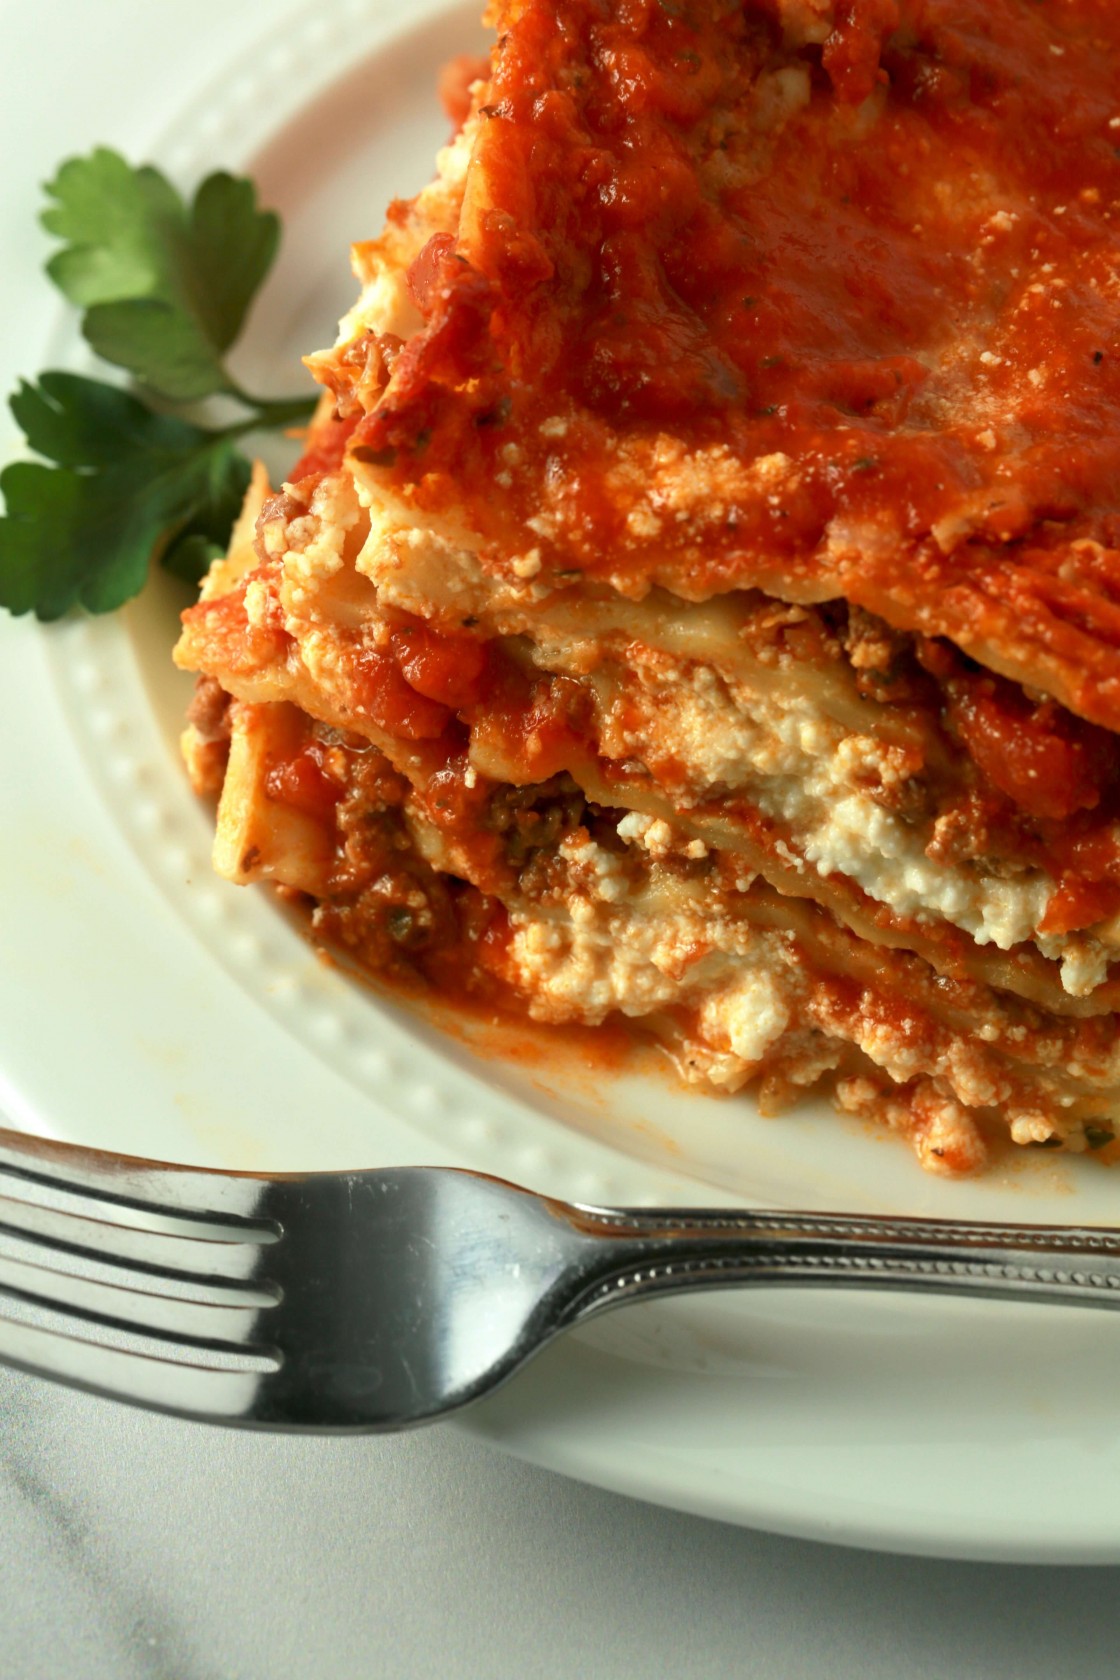 Classic 3 cheese lasagna with meat sauce recipe - EverybodyCraves